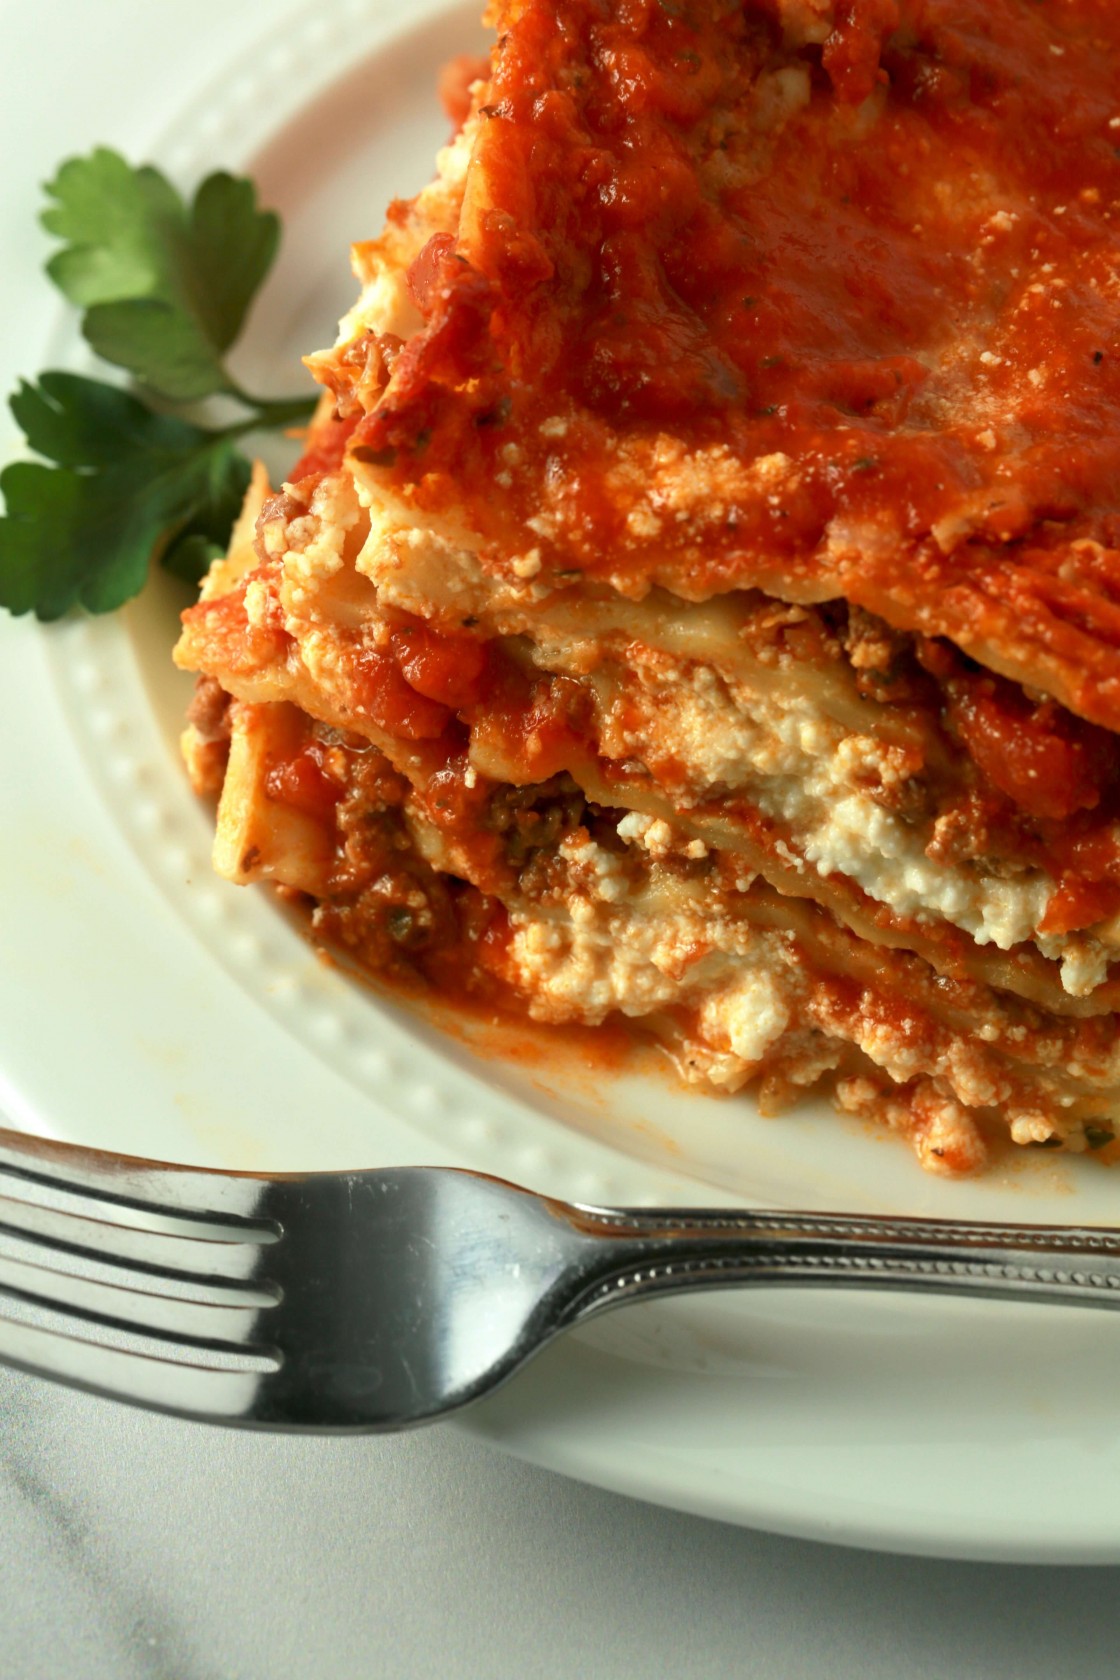 Classic 3 cheese lasagna with meat sauce recipe - EverybodyCraves